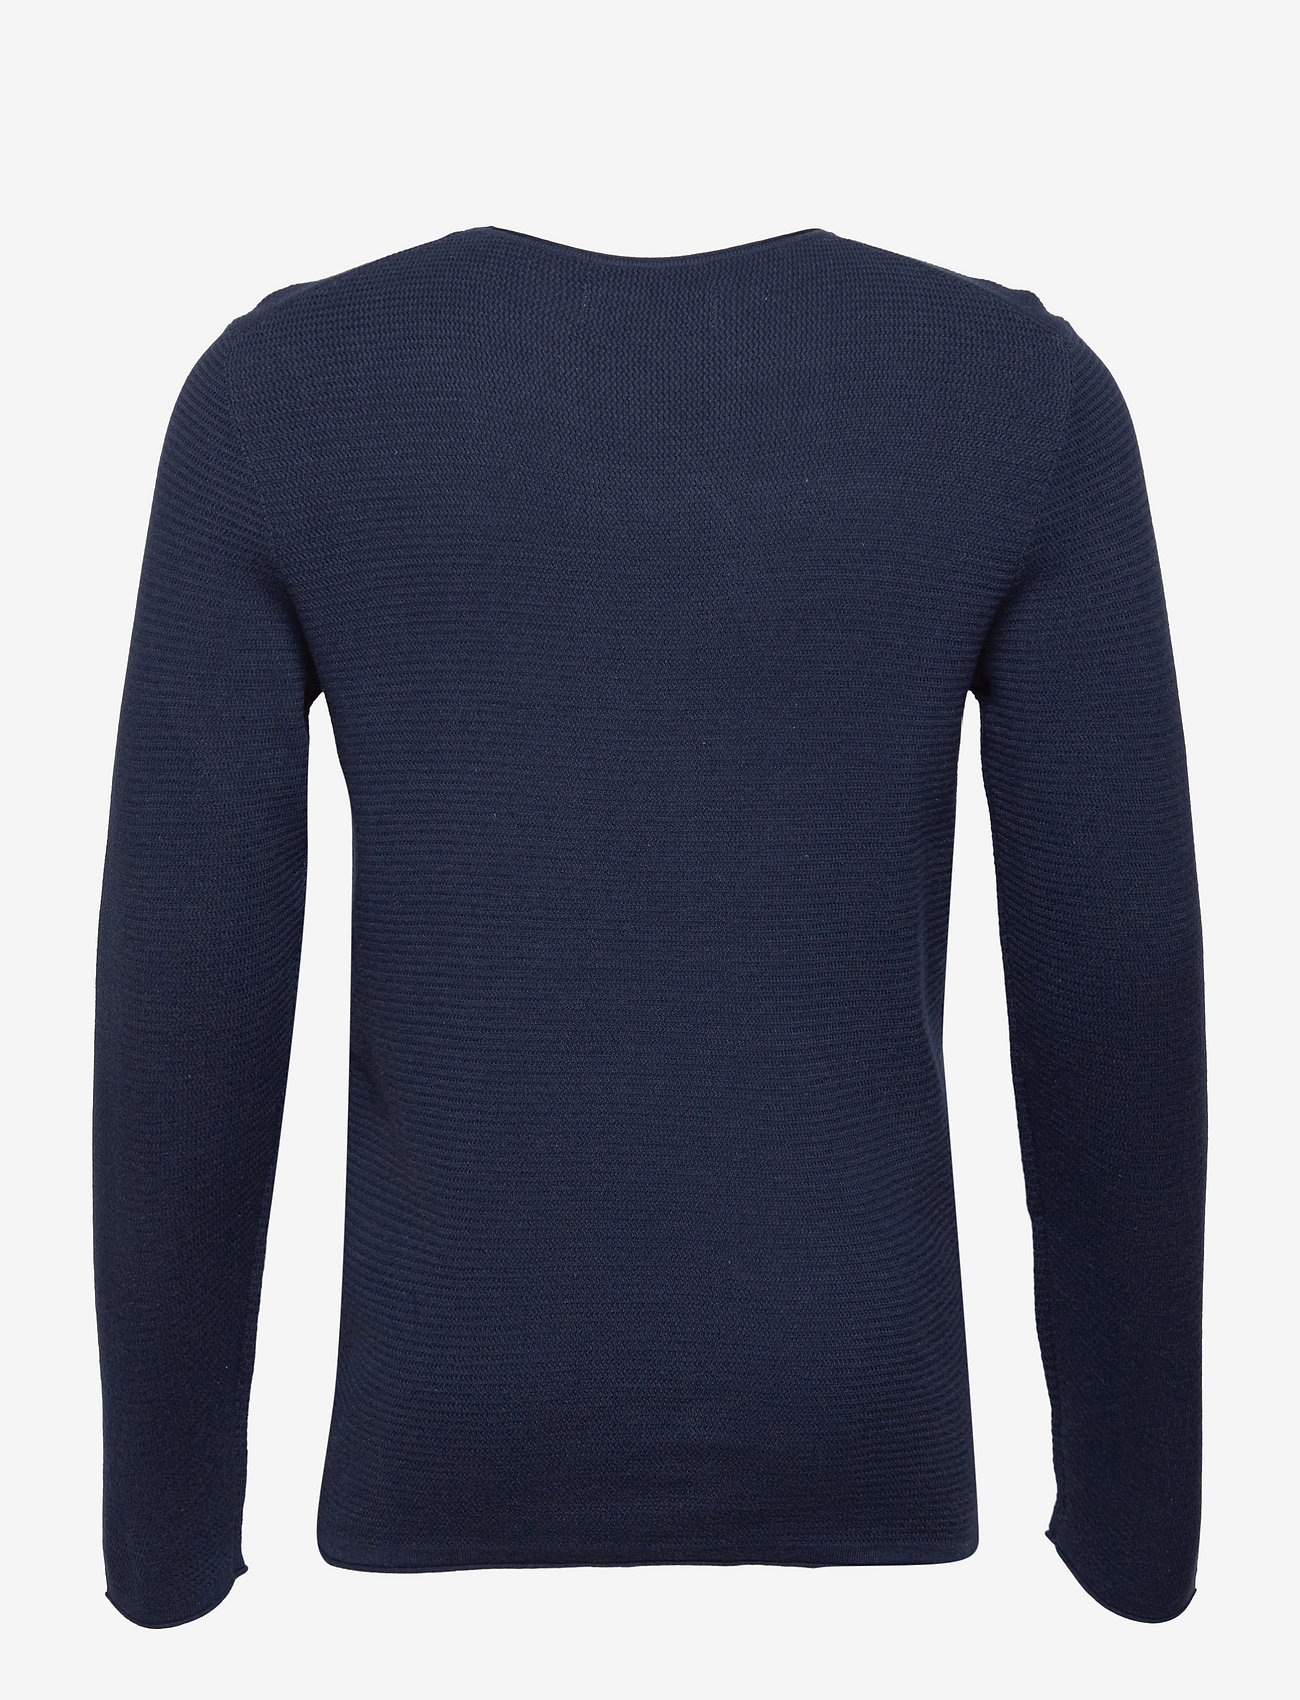 Tom Tailor - zigzag structured crewneck - madalaimad hinnad - sky captain blue non-solid - 1